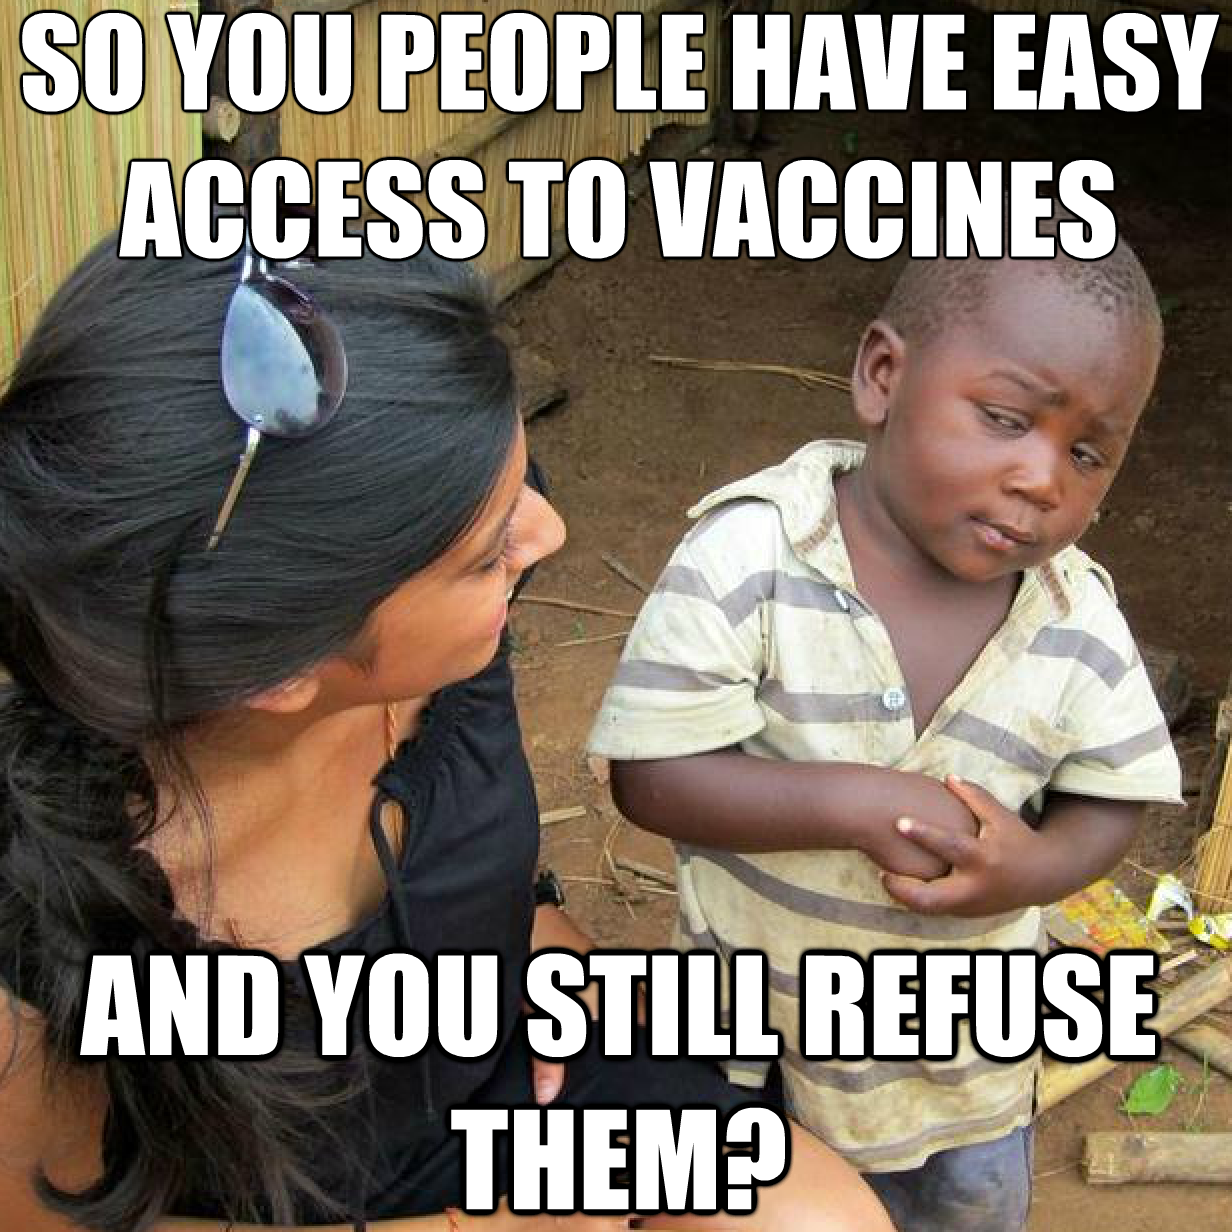 VaccineAfrican